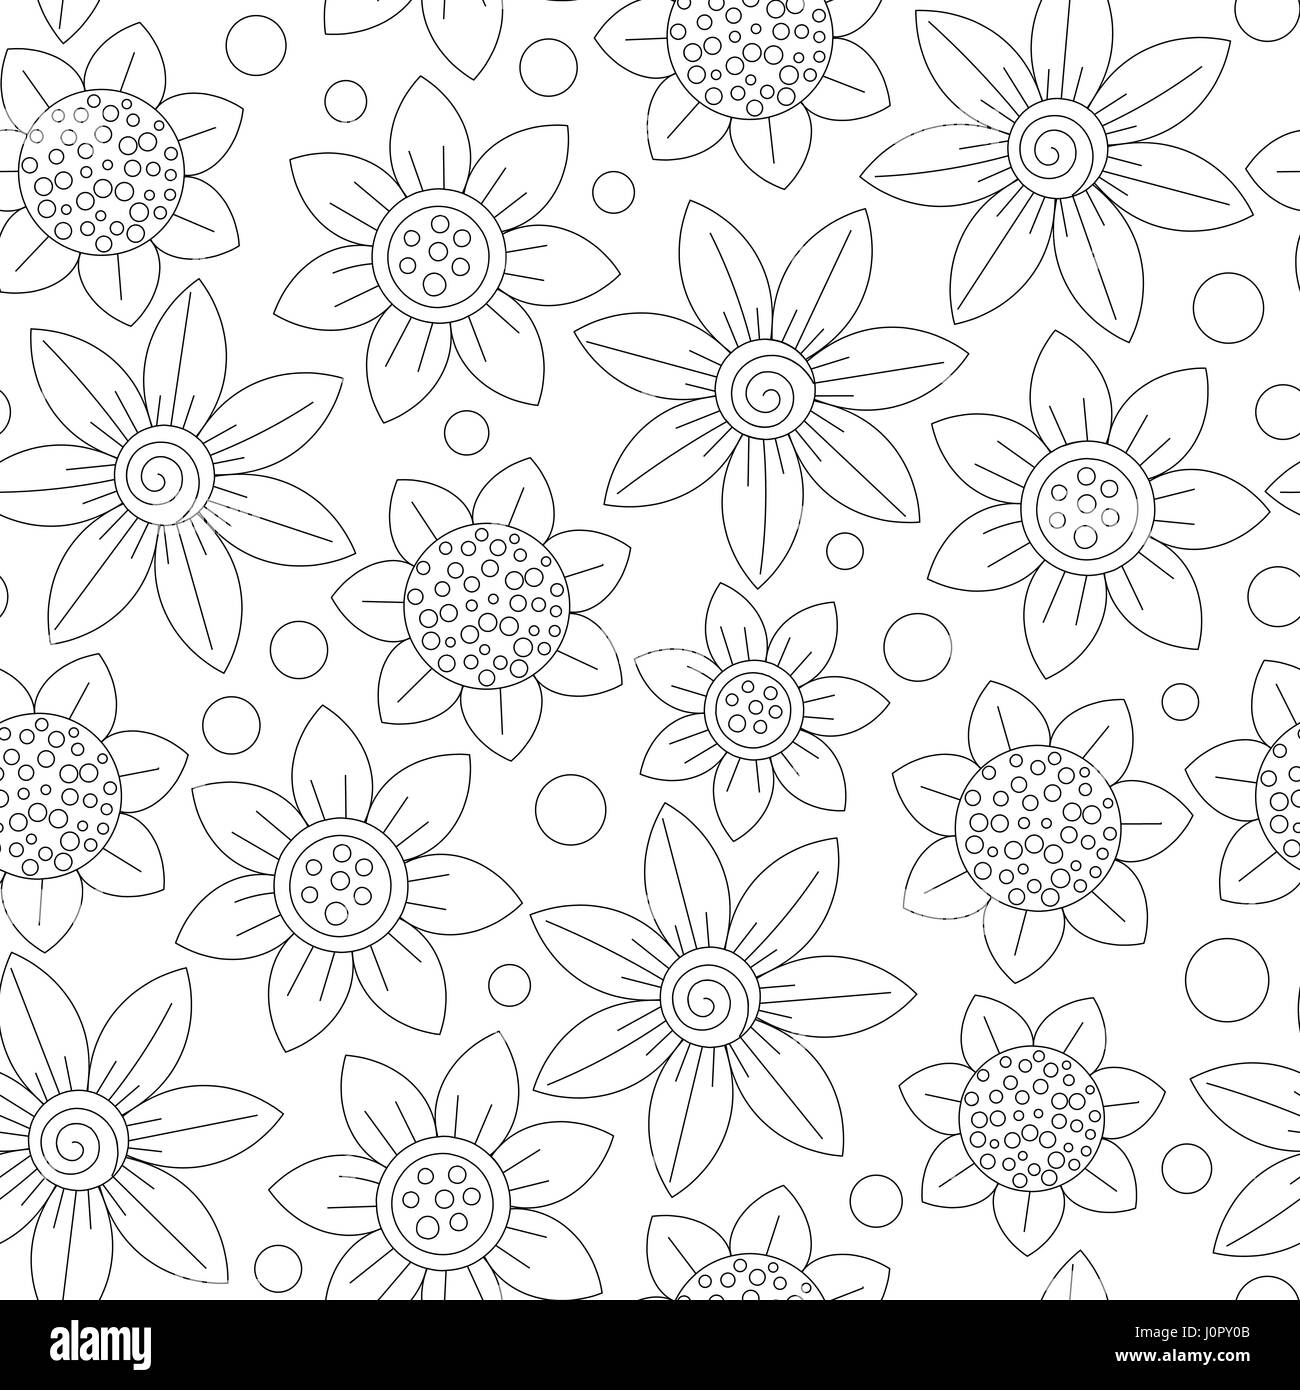 Floral seamless cute pattern simple design. Primitive flowers line ornament. Black outline on white background. Coloring book page. Vector illustratio Stock Vector